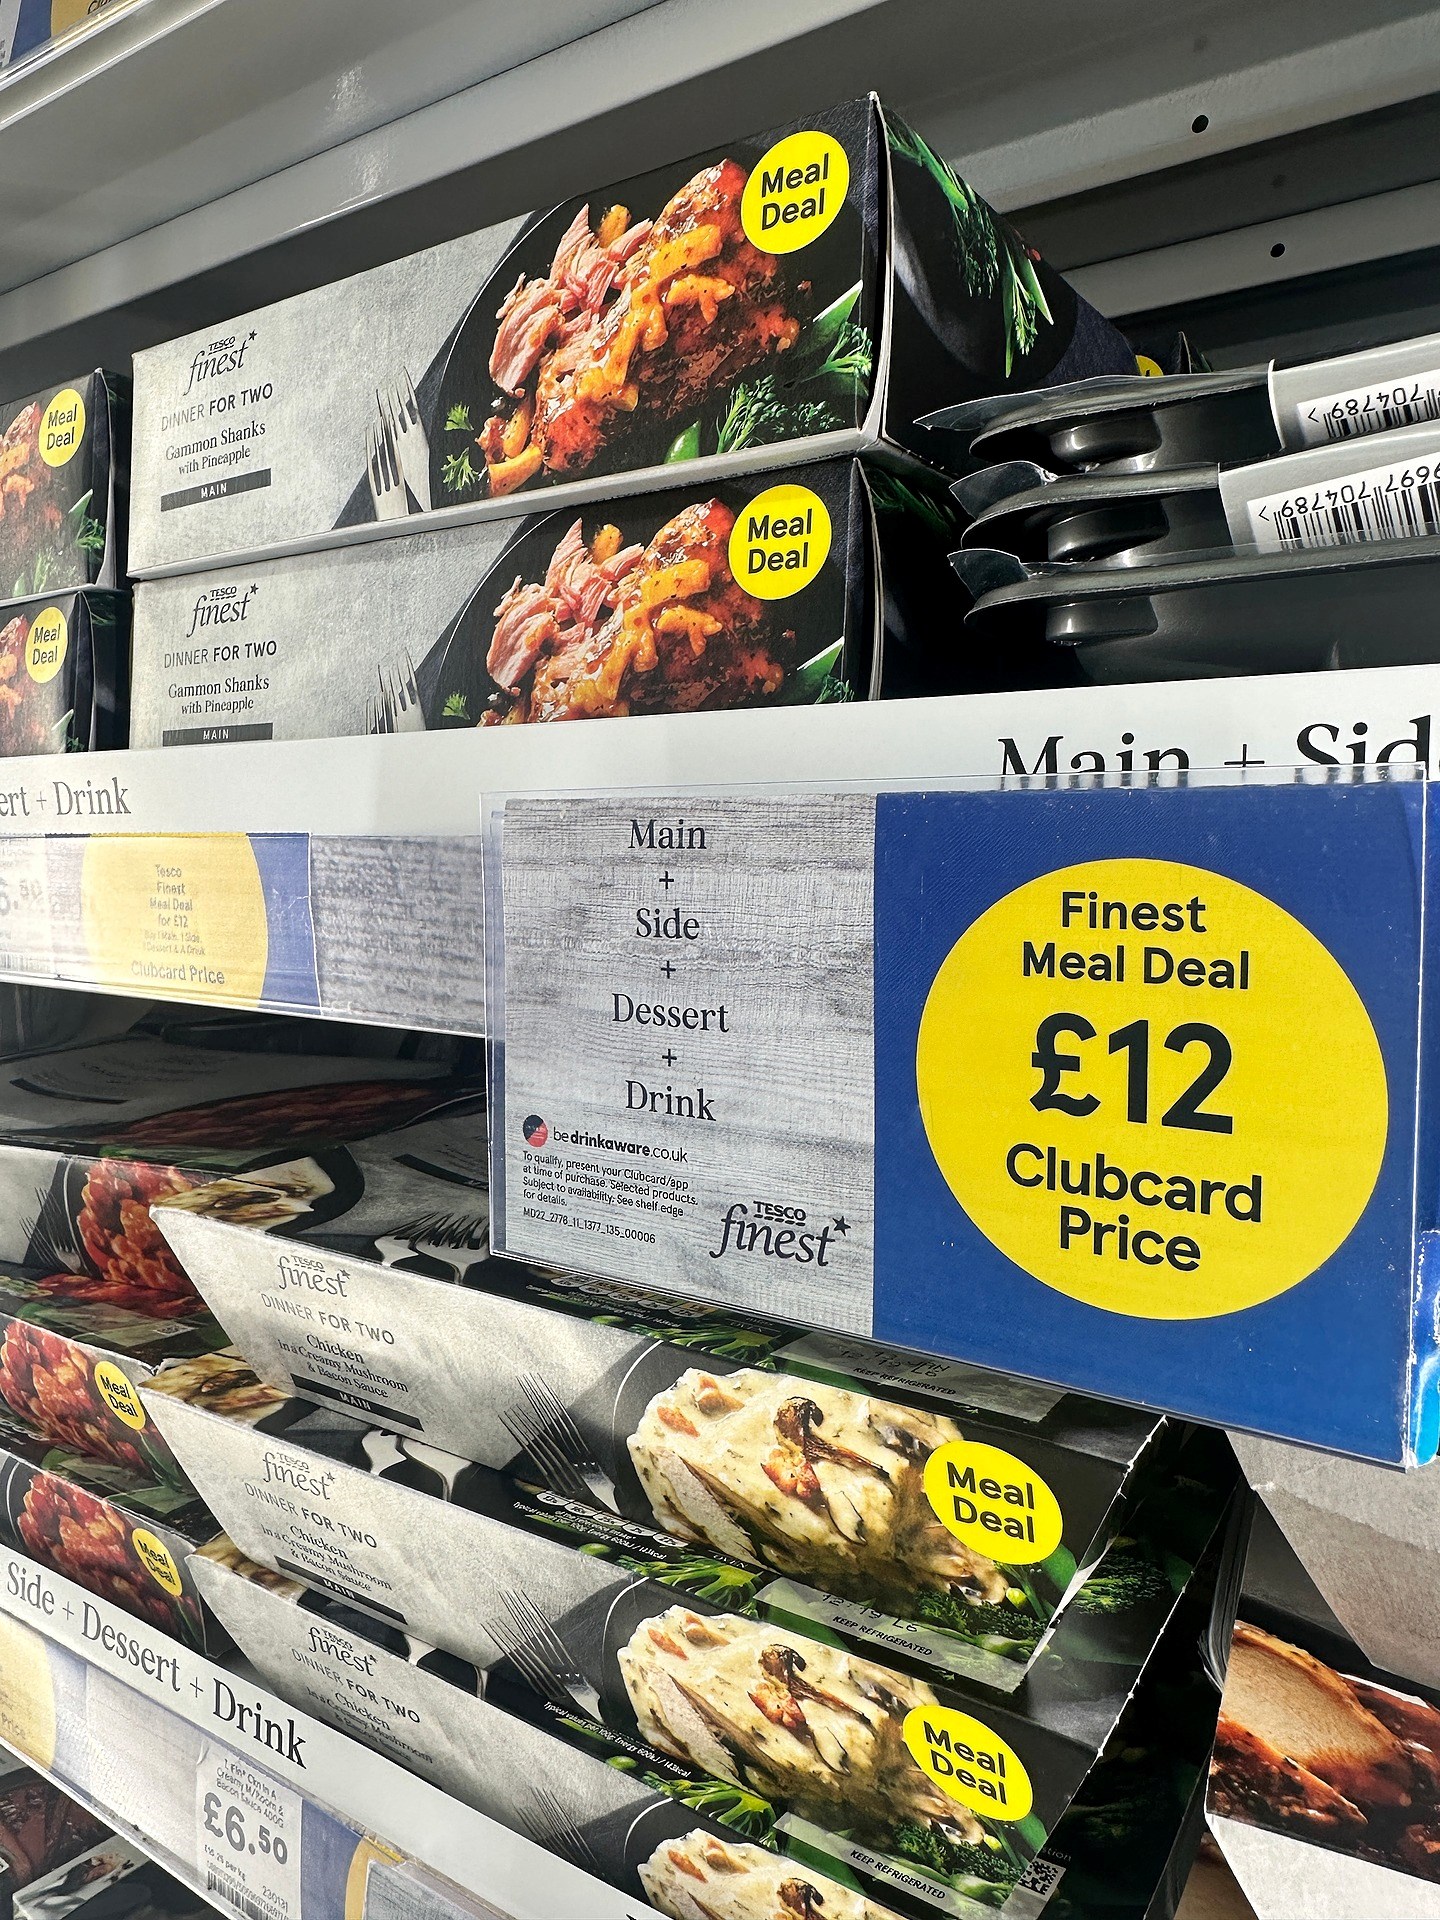 Finest Meal Deal for £12 at Tesco